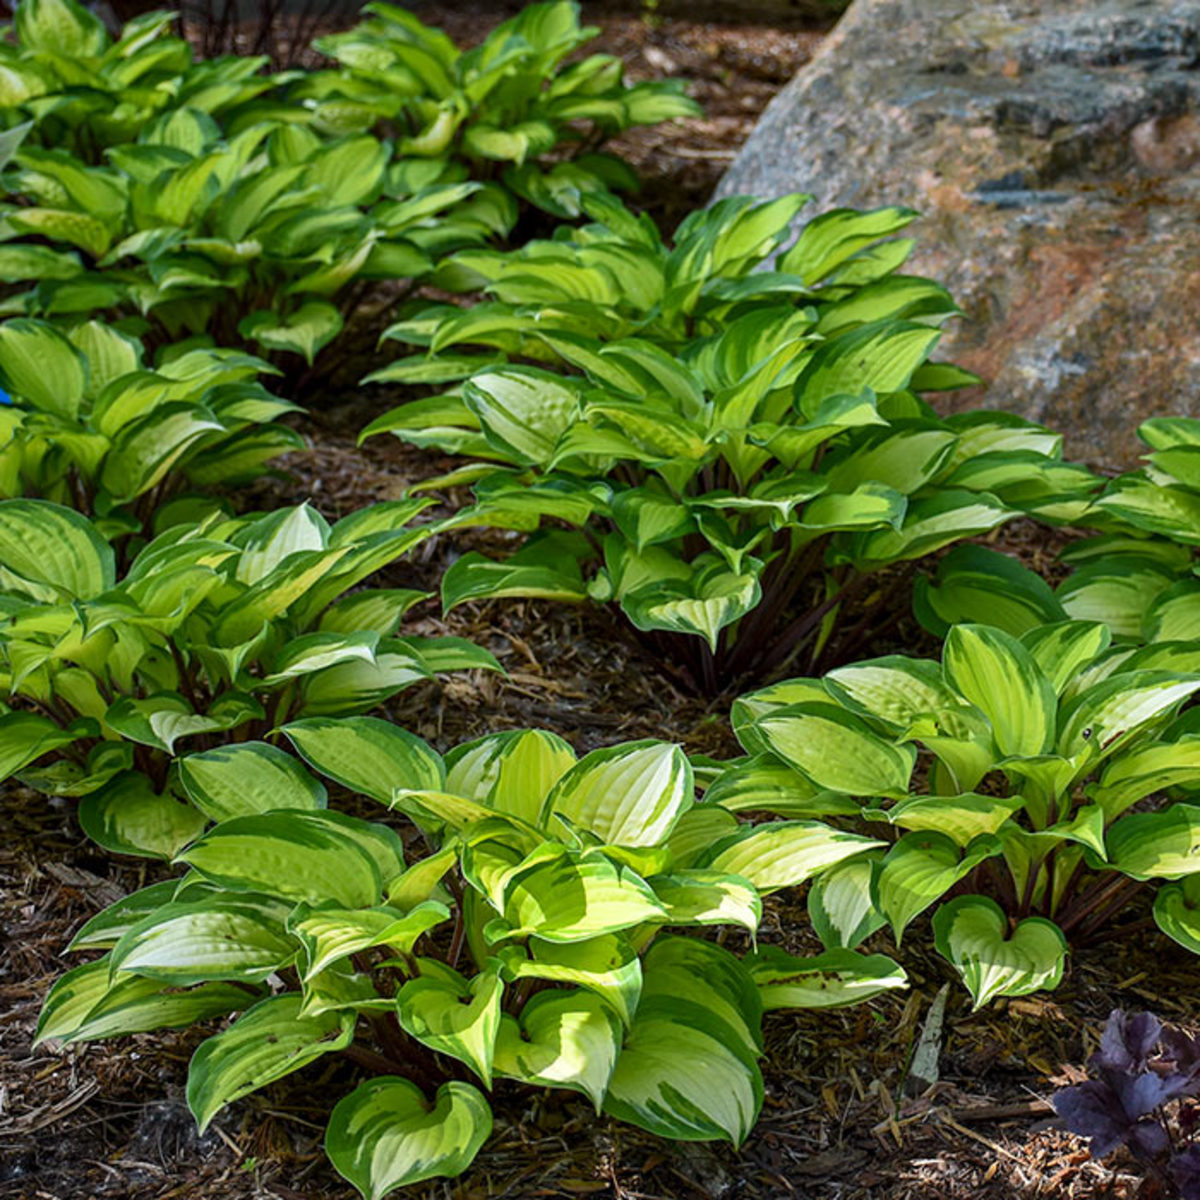 Hosta 'Island Breeze', the 2022 Hosta of the Year, is a small cultivar that displays soft yellow summer variegation in part shade. In deeper shade, the color will be more lime green.